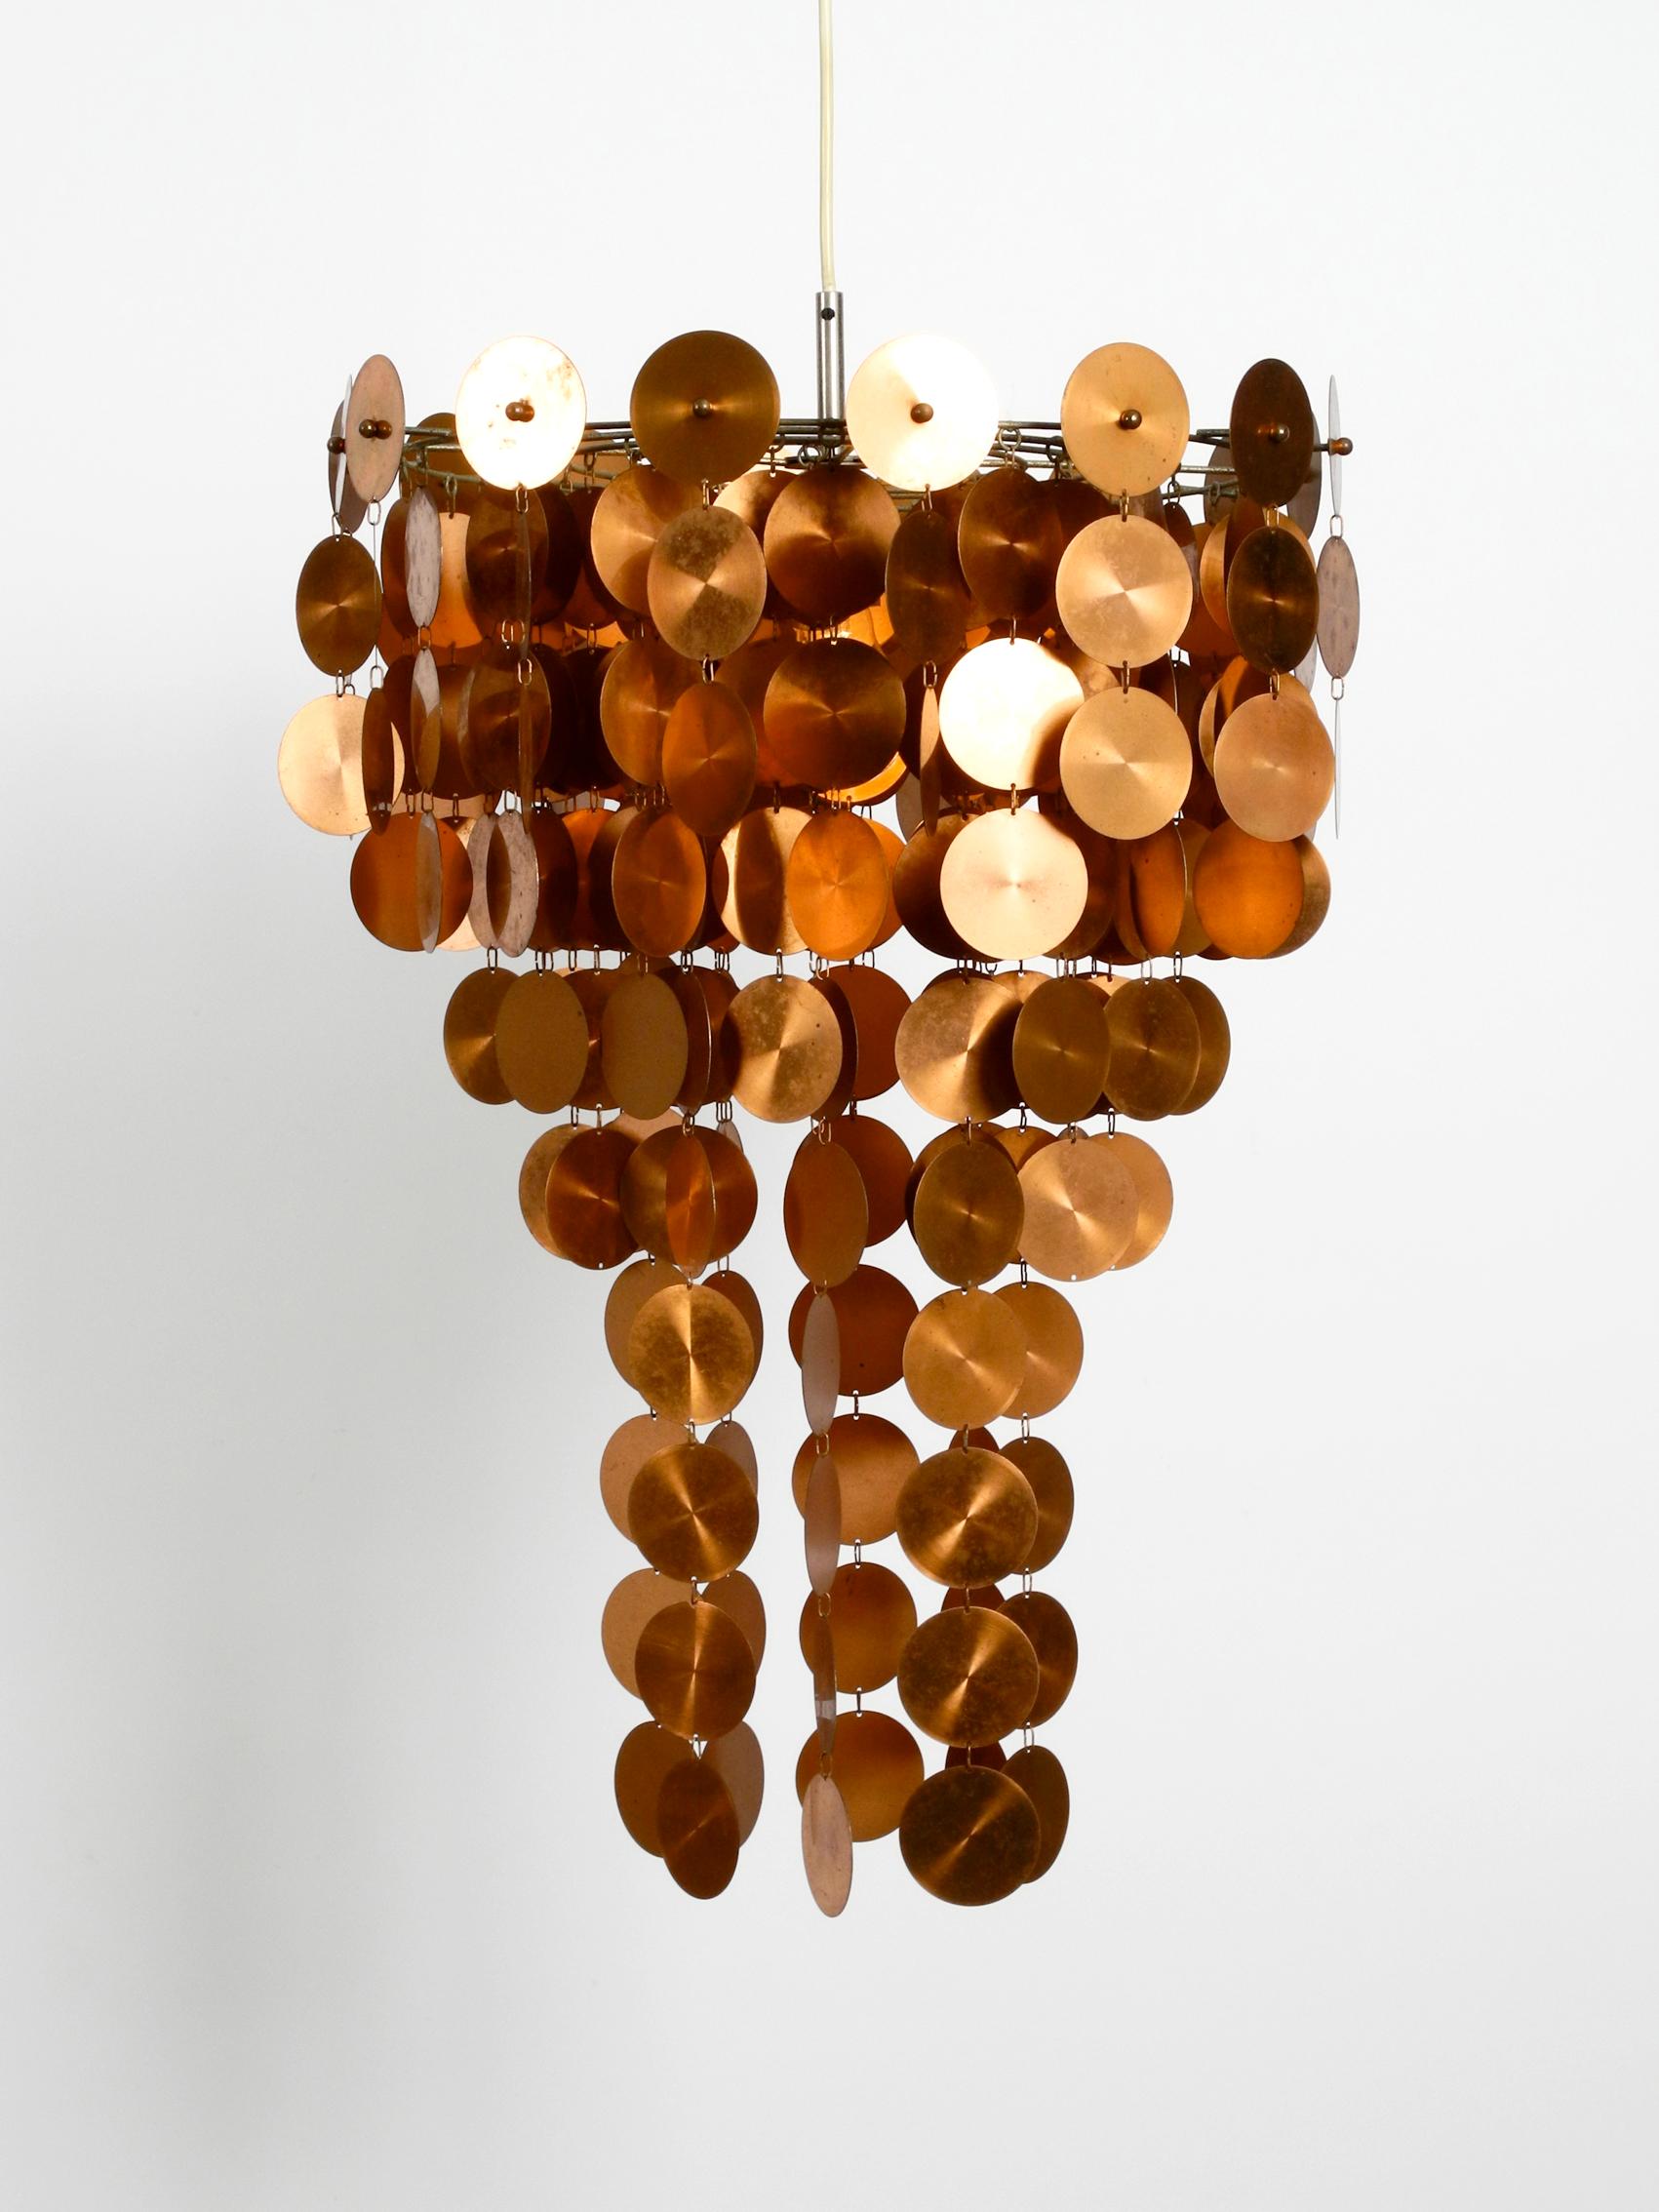 Stunning 1970s Pop Art Extra Large Lamp with Copper Discs Arranged as a Grape For Sale 4